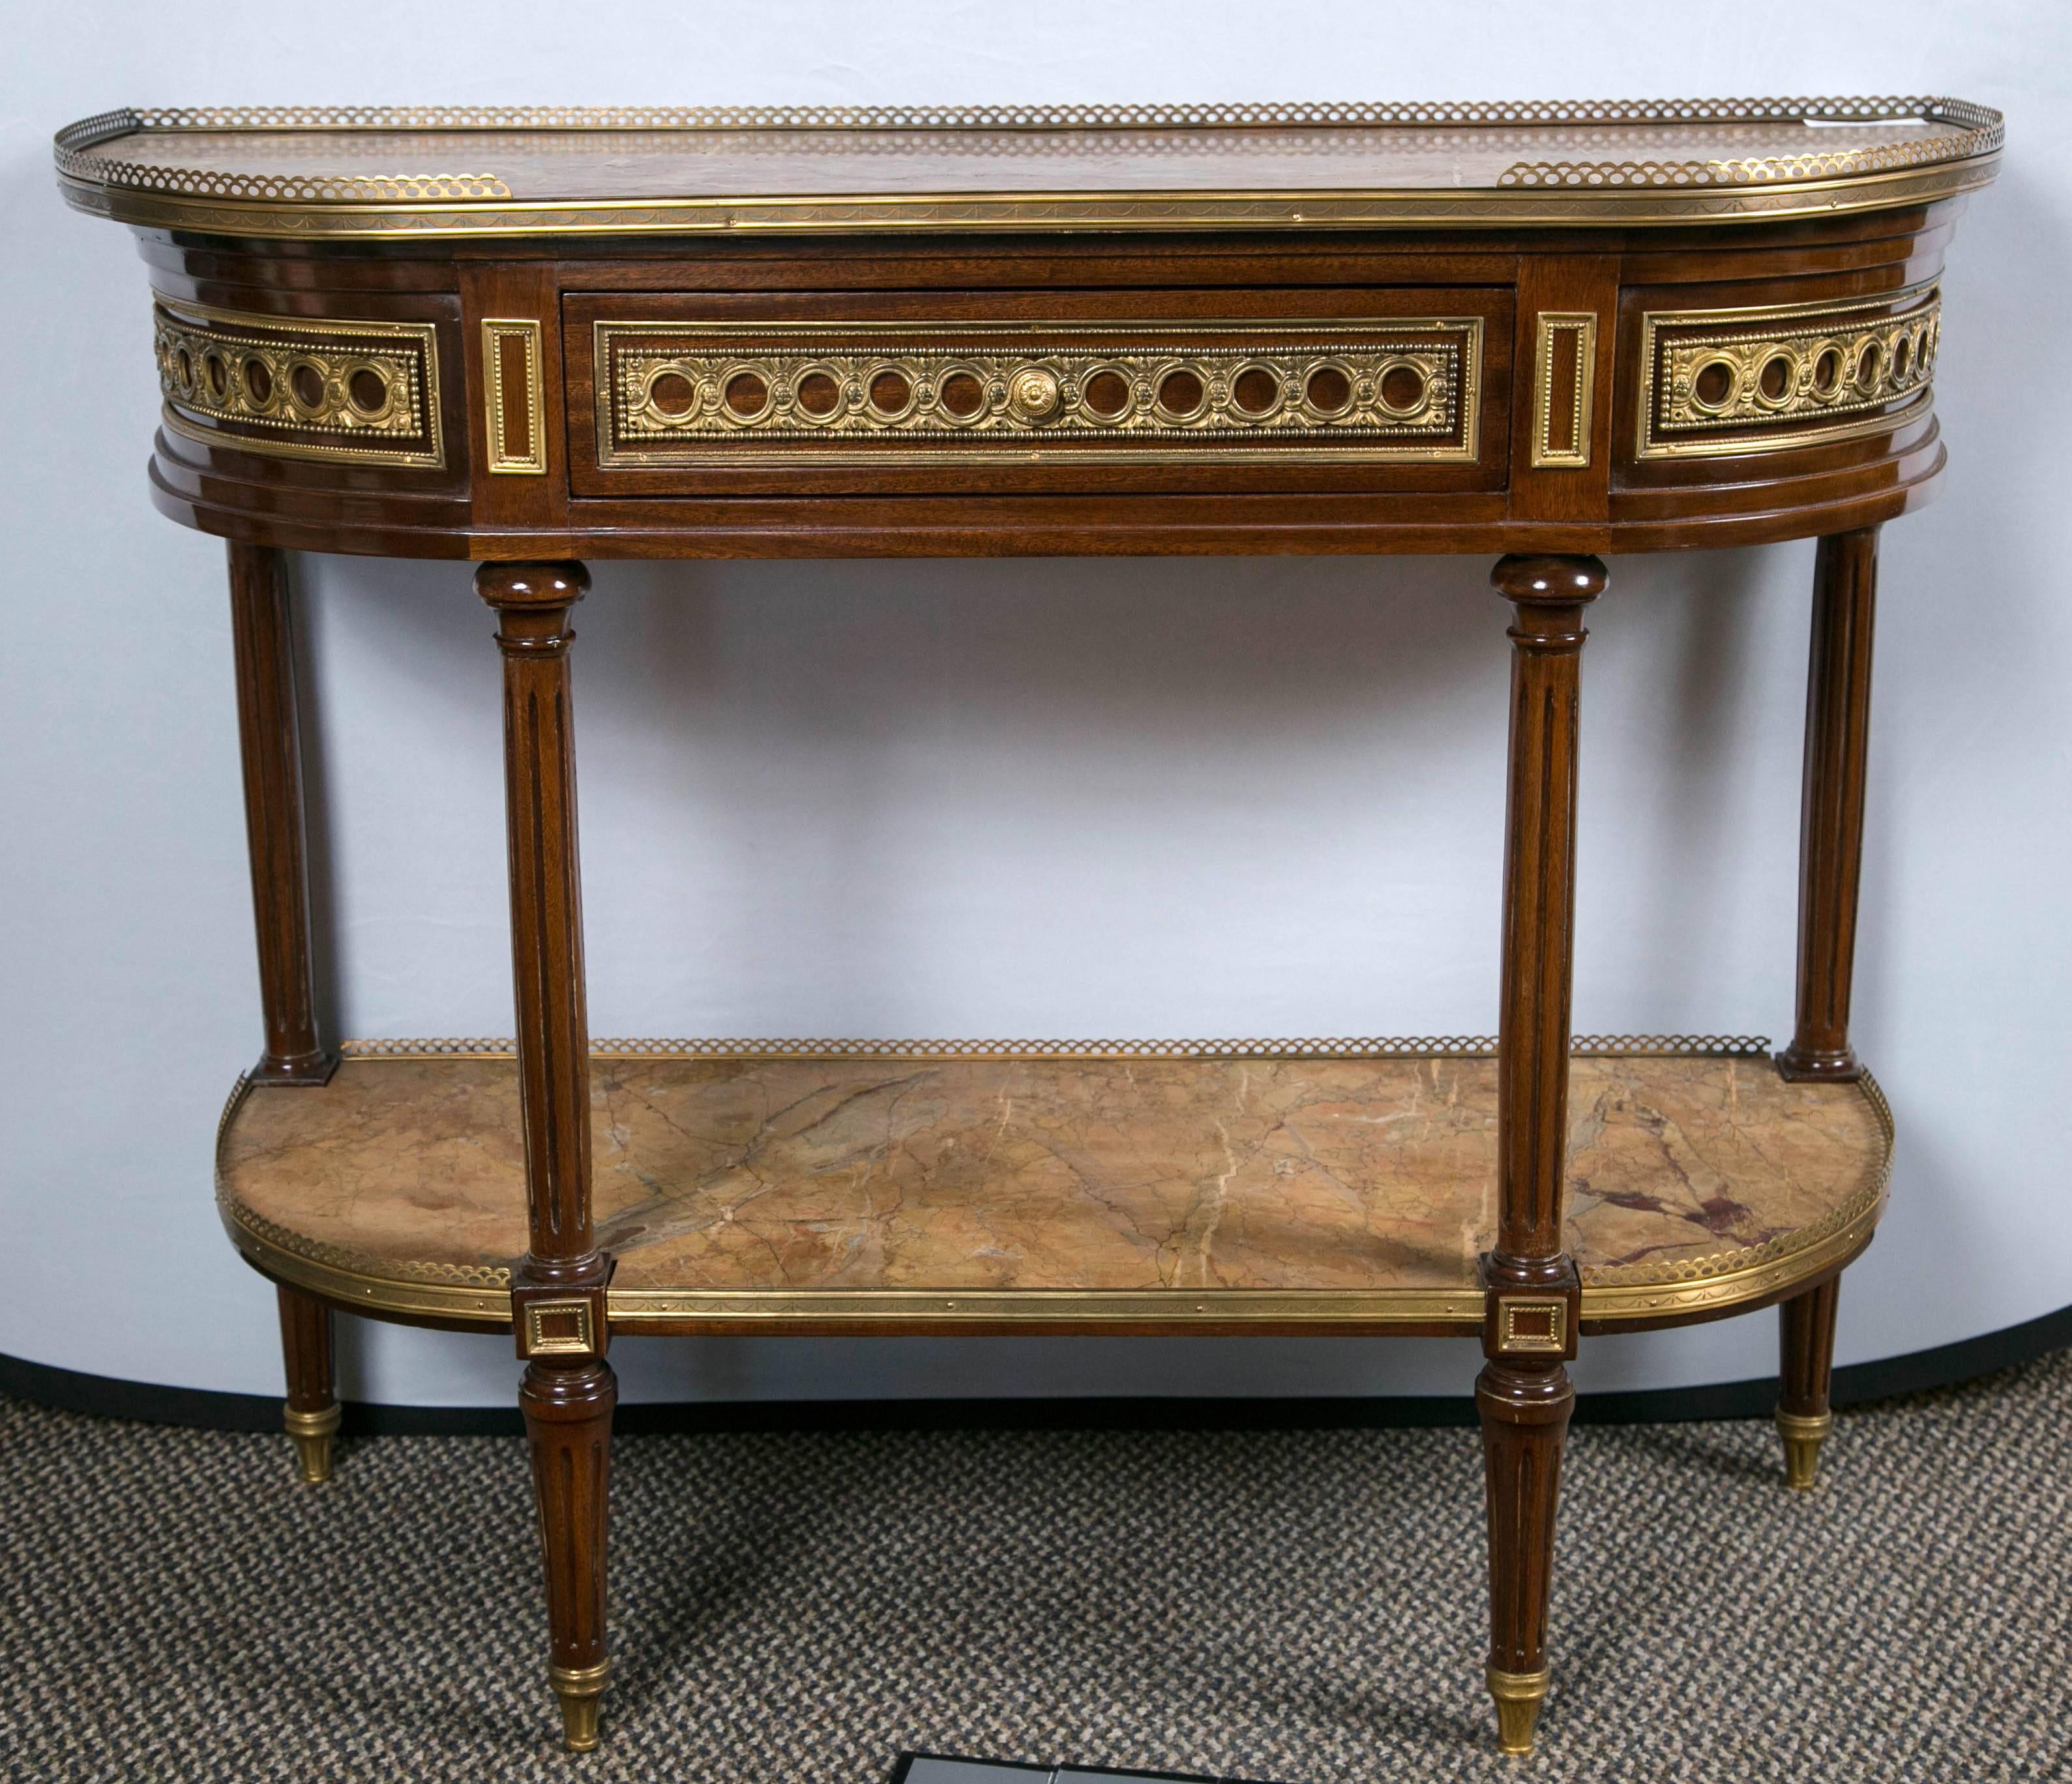 From an old Brookville Long Island mansion come these documented fine French marble-top console / desserts by Maison Jansen. The chiseled bronze of jewelry quality run the length of these one of a kind console tables. Louis XVI stylized legs having